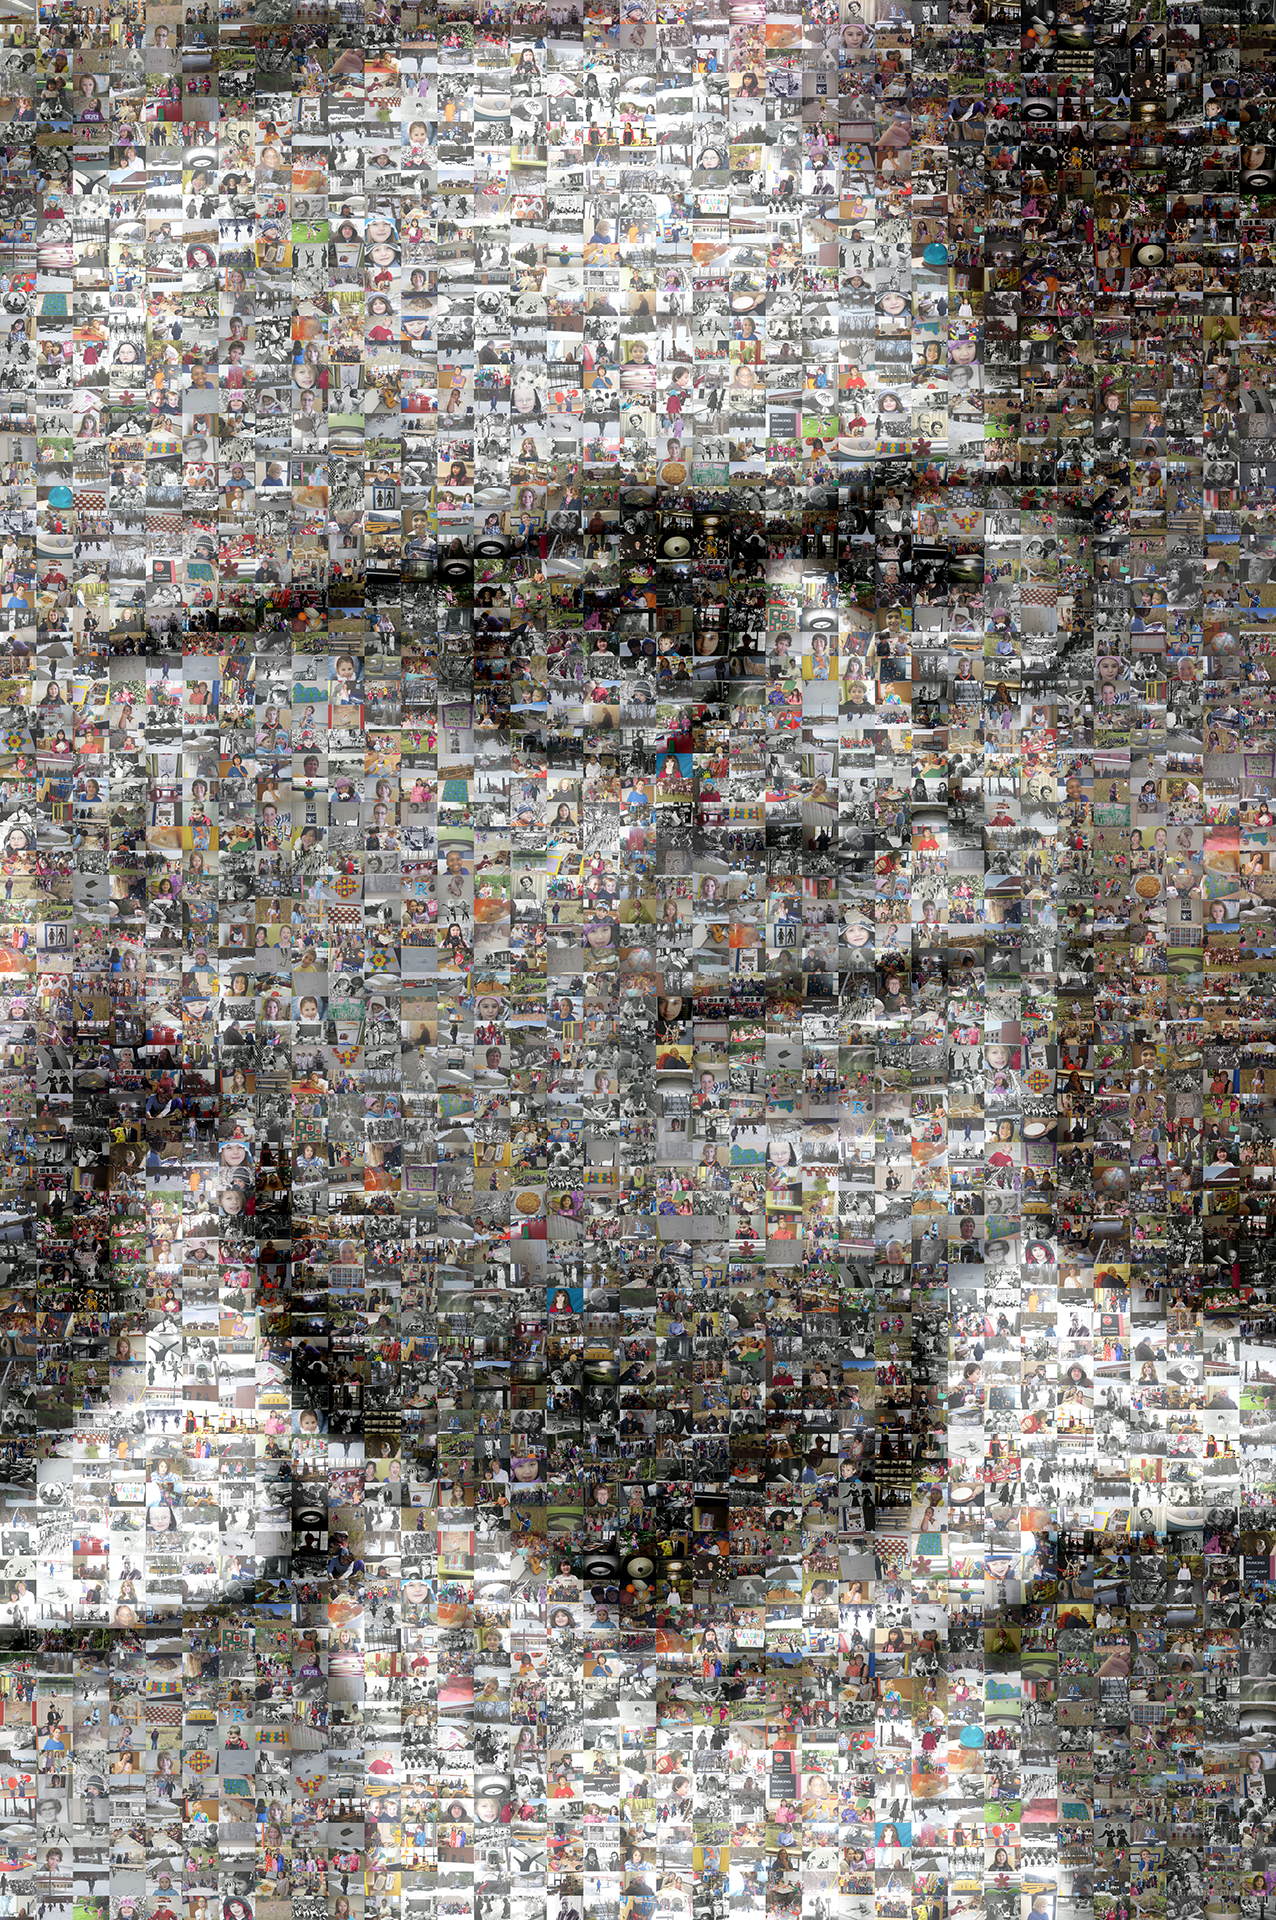 photo mosaic This portrait of a school's founder using 894 photos from school events